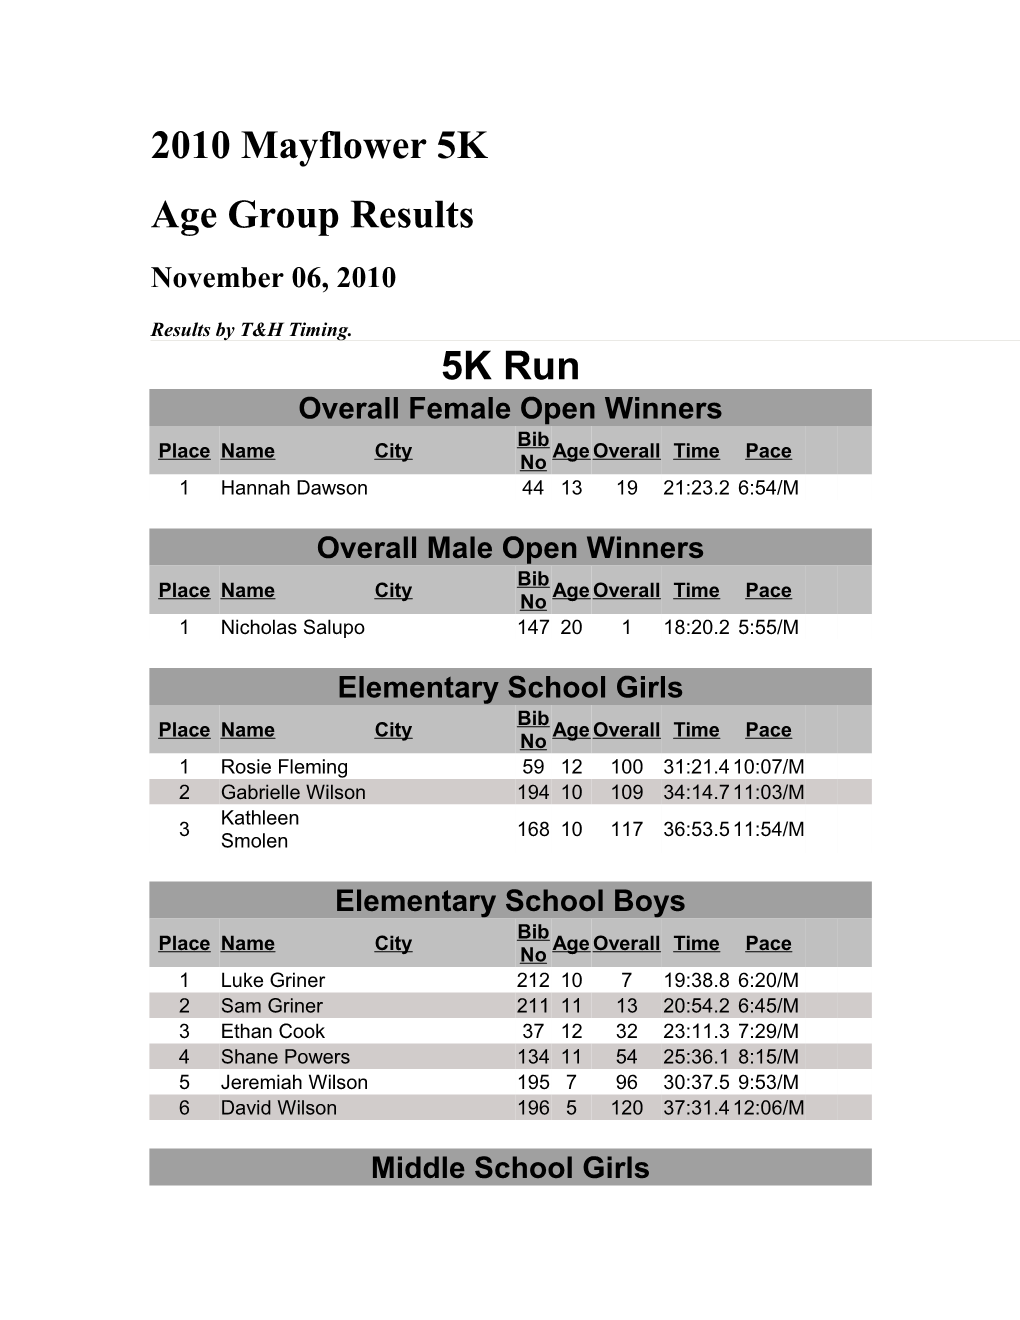 Age Group Results s1